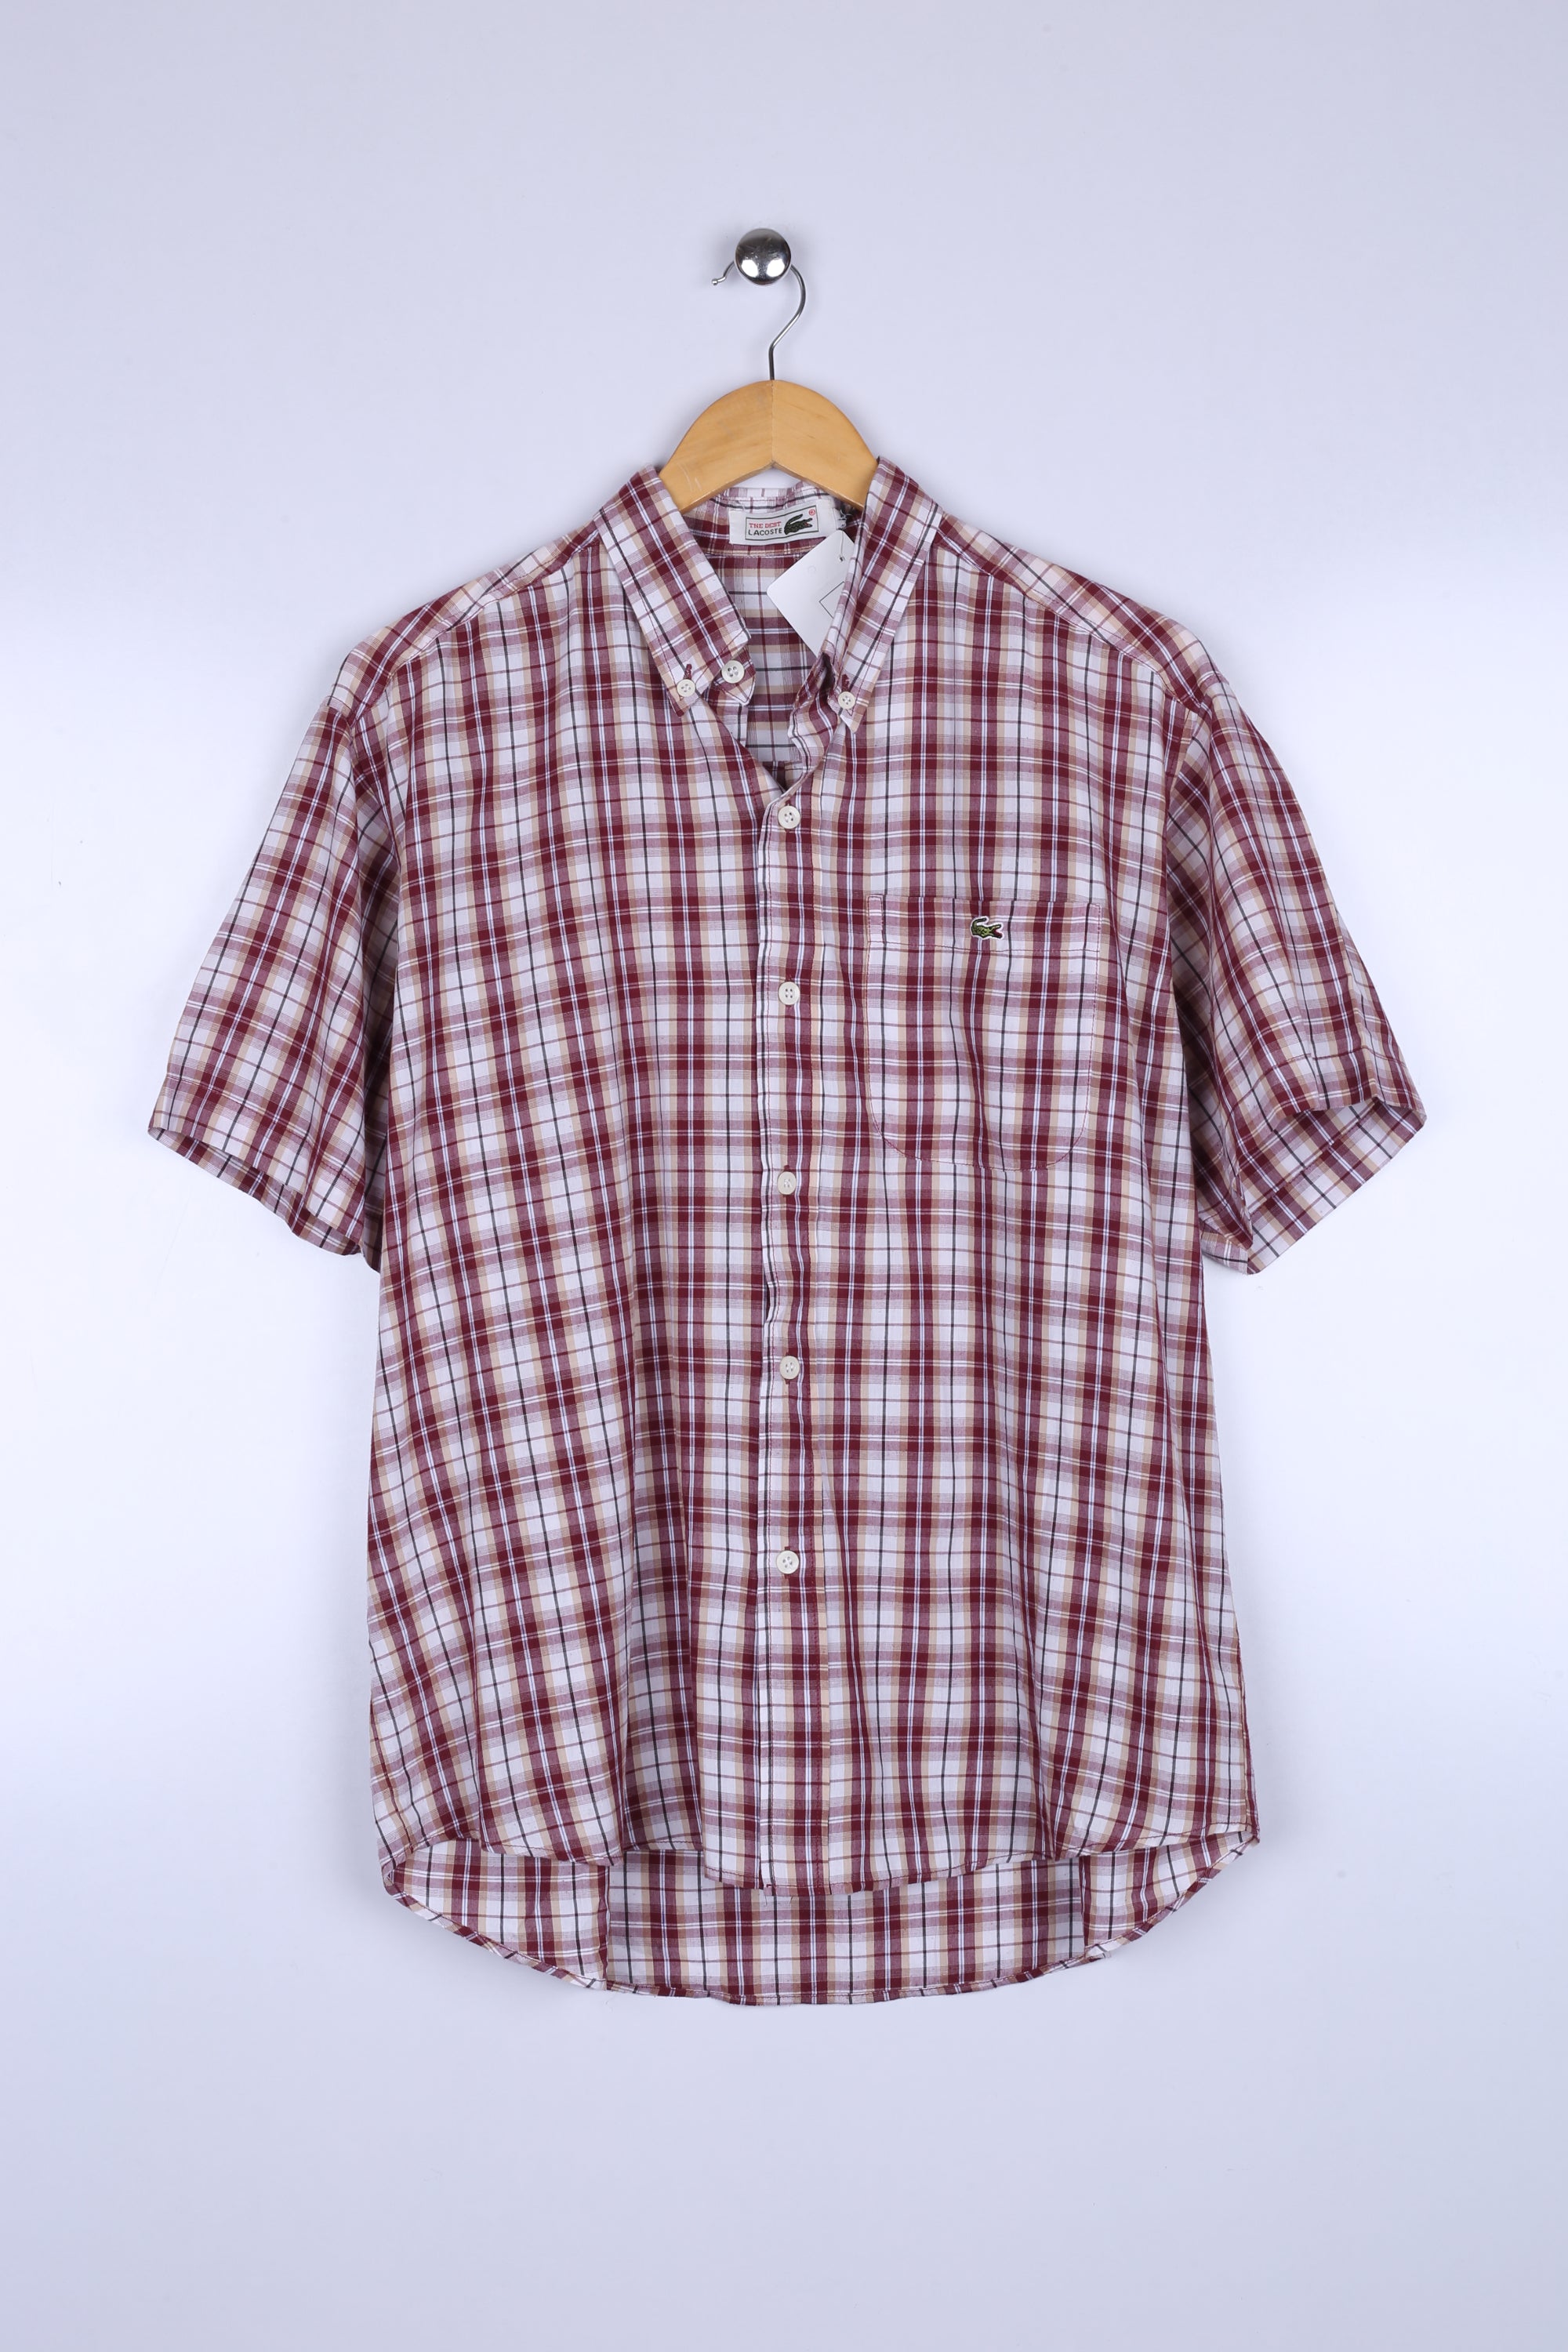 Vintage Lacoste Shirt Red/White Checkered